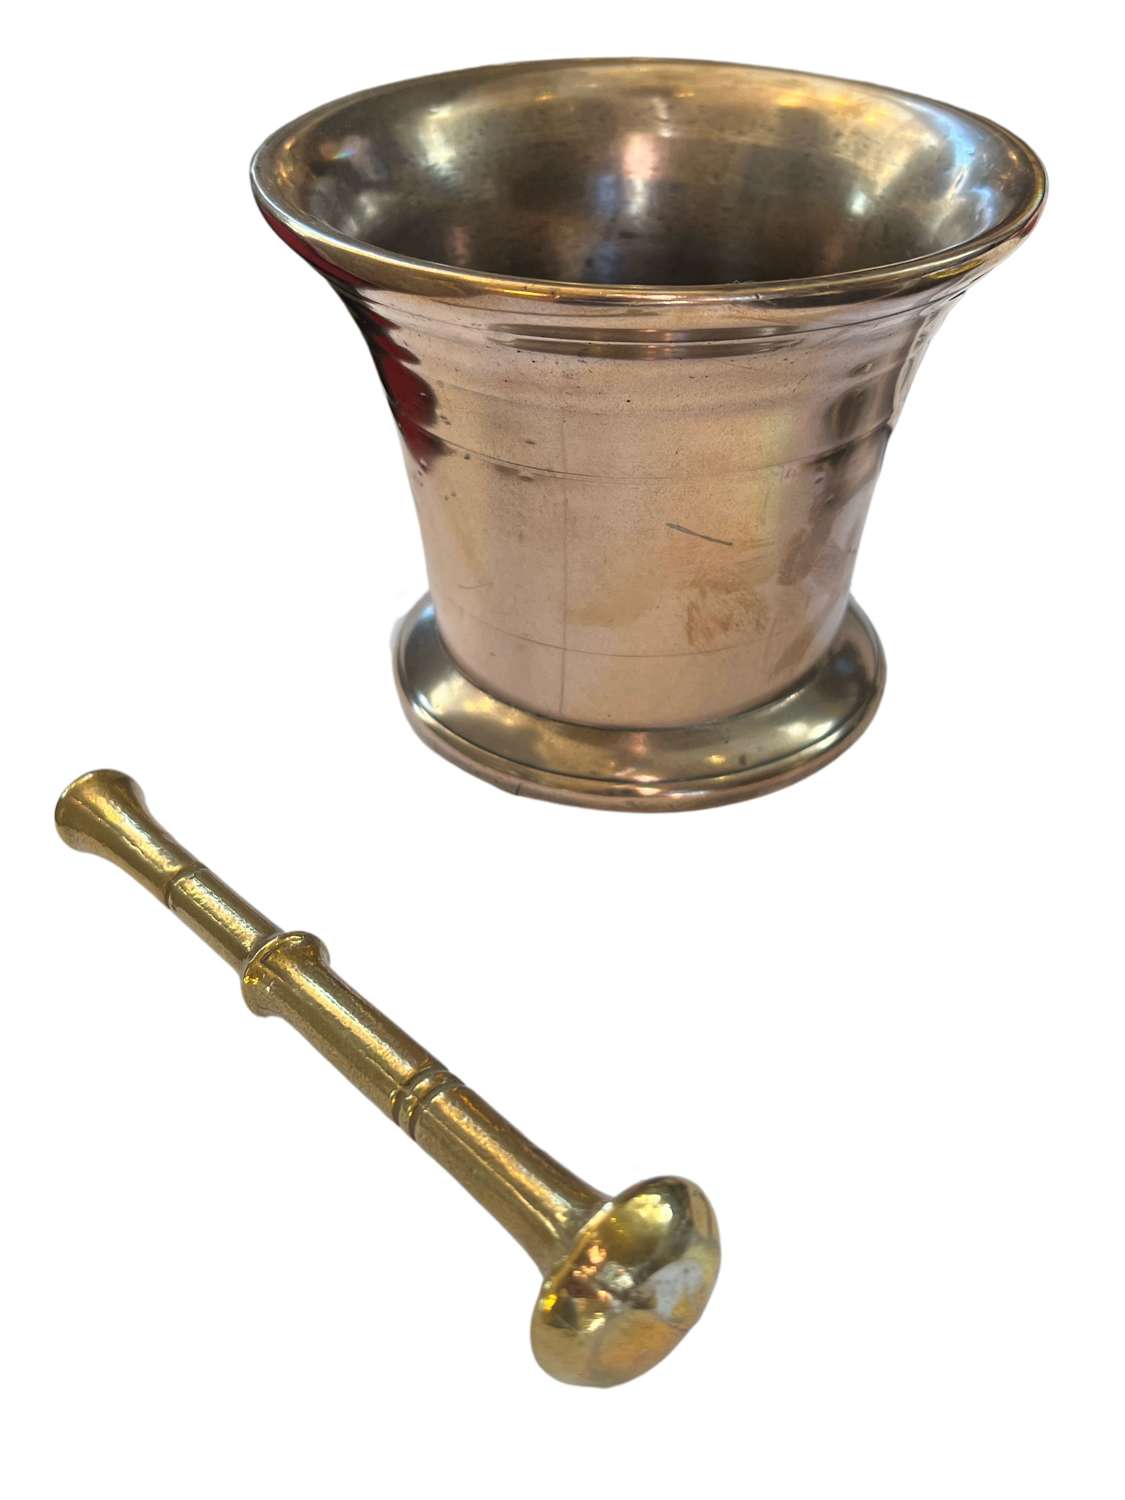 A solid brass pestle and mortar